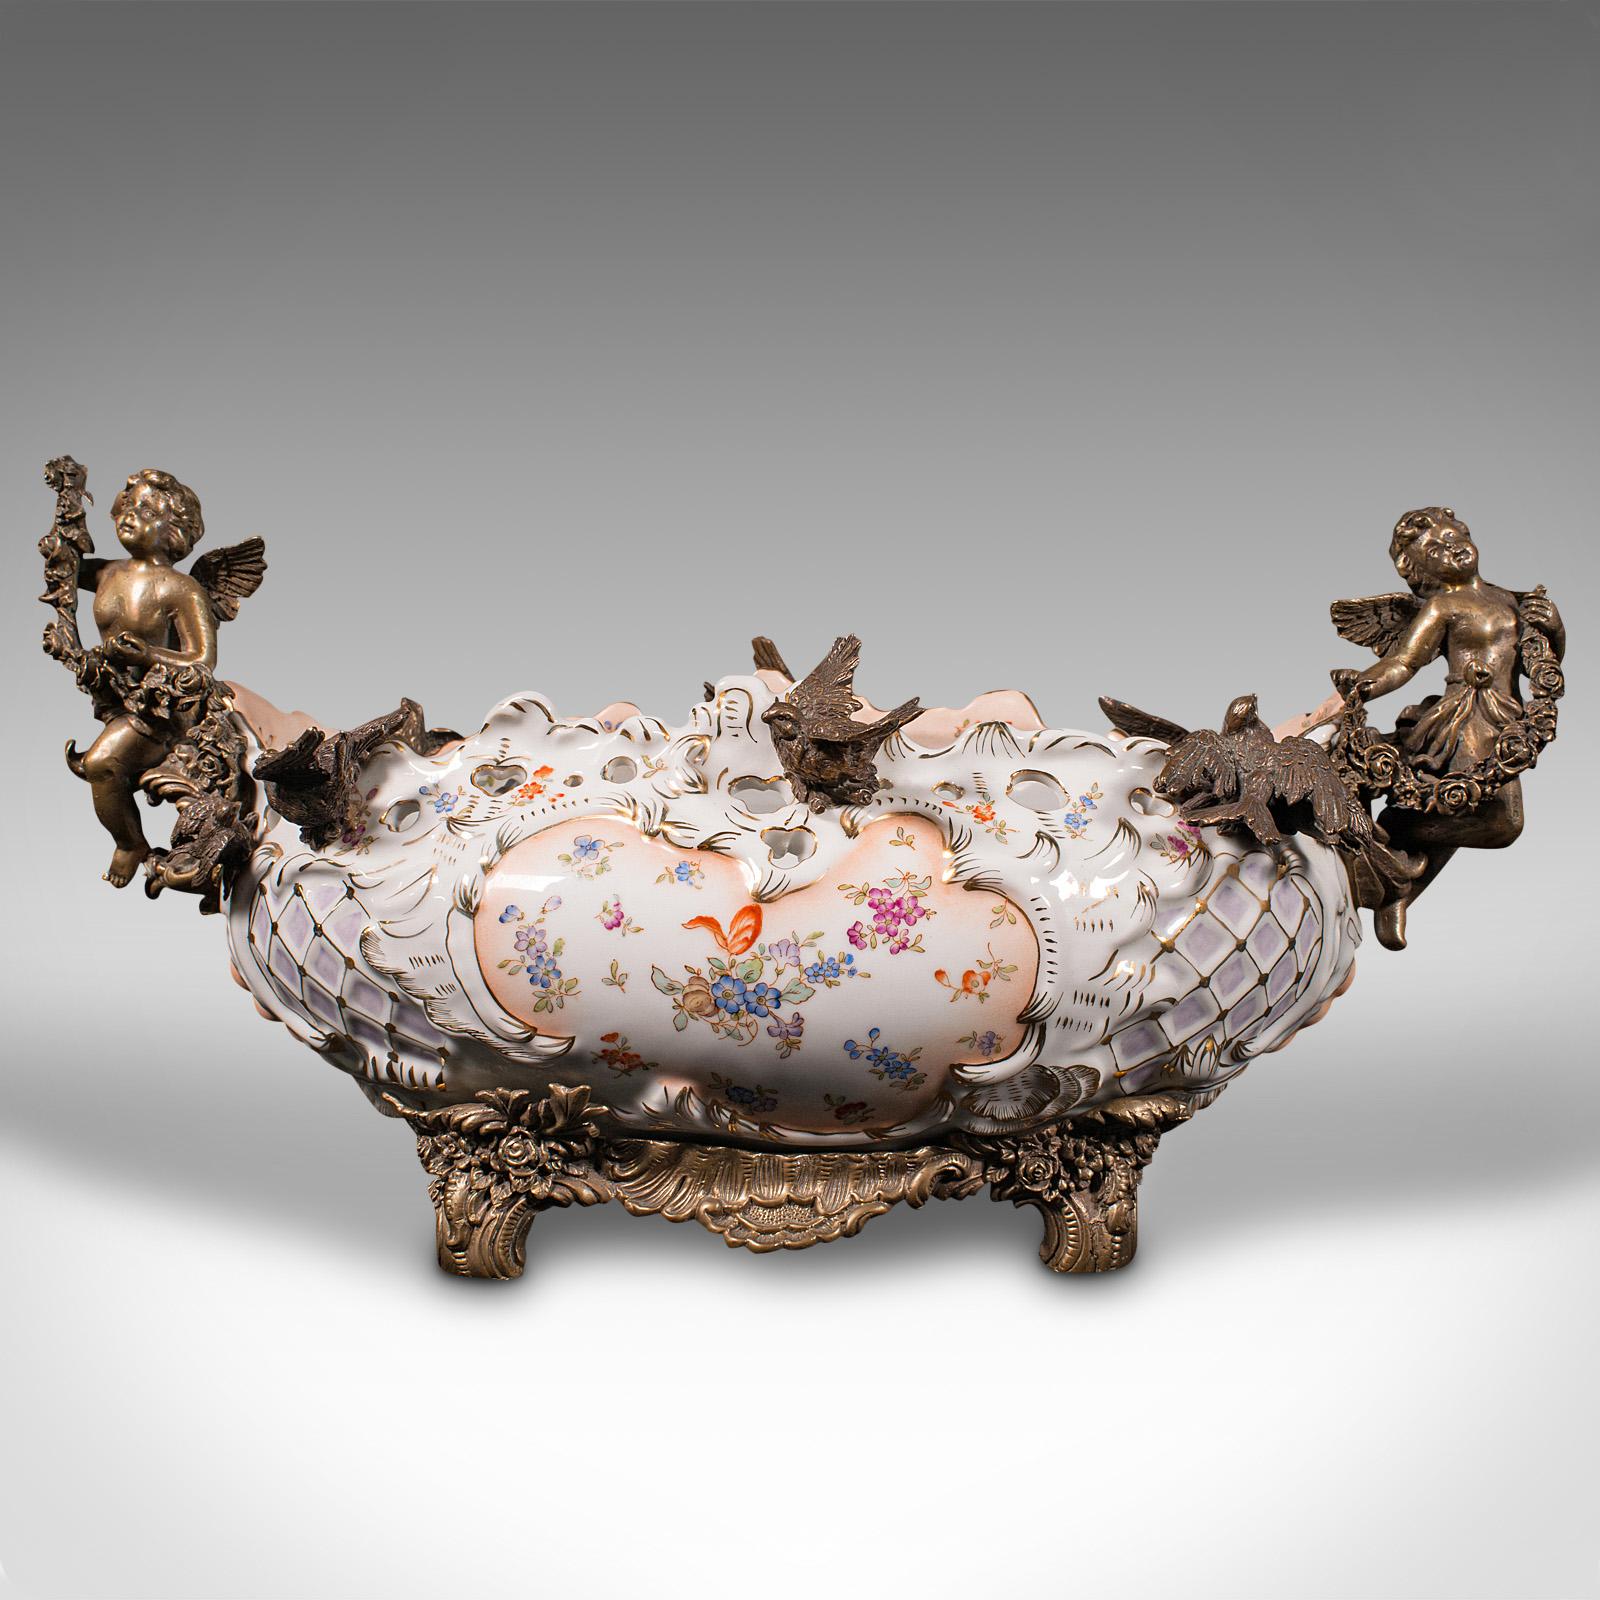 This is a large vintage decorative serving dish. An Oriental, ceramic centrepiece bowl with neoclassical taste, dating to the late 20th century, circa 1980.

Wonderfully decorated with extravagant gilt mounts
Displays a desirable aged patina and